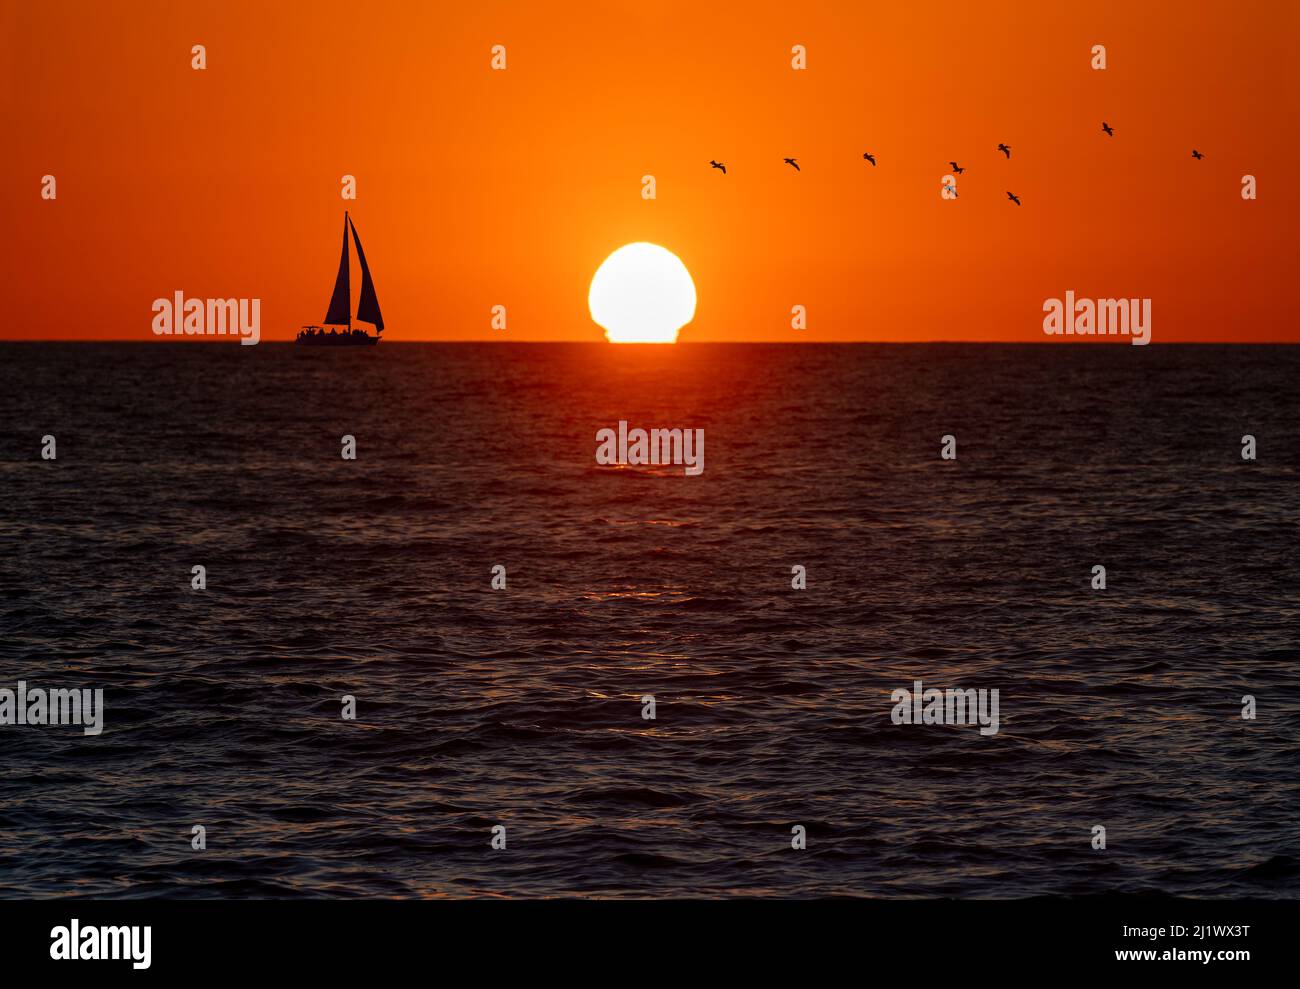 A Sailboat Sailing Along The Sea And Birds Flying Overhead In A Color Sunset Sky Stock Photo